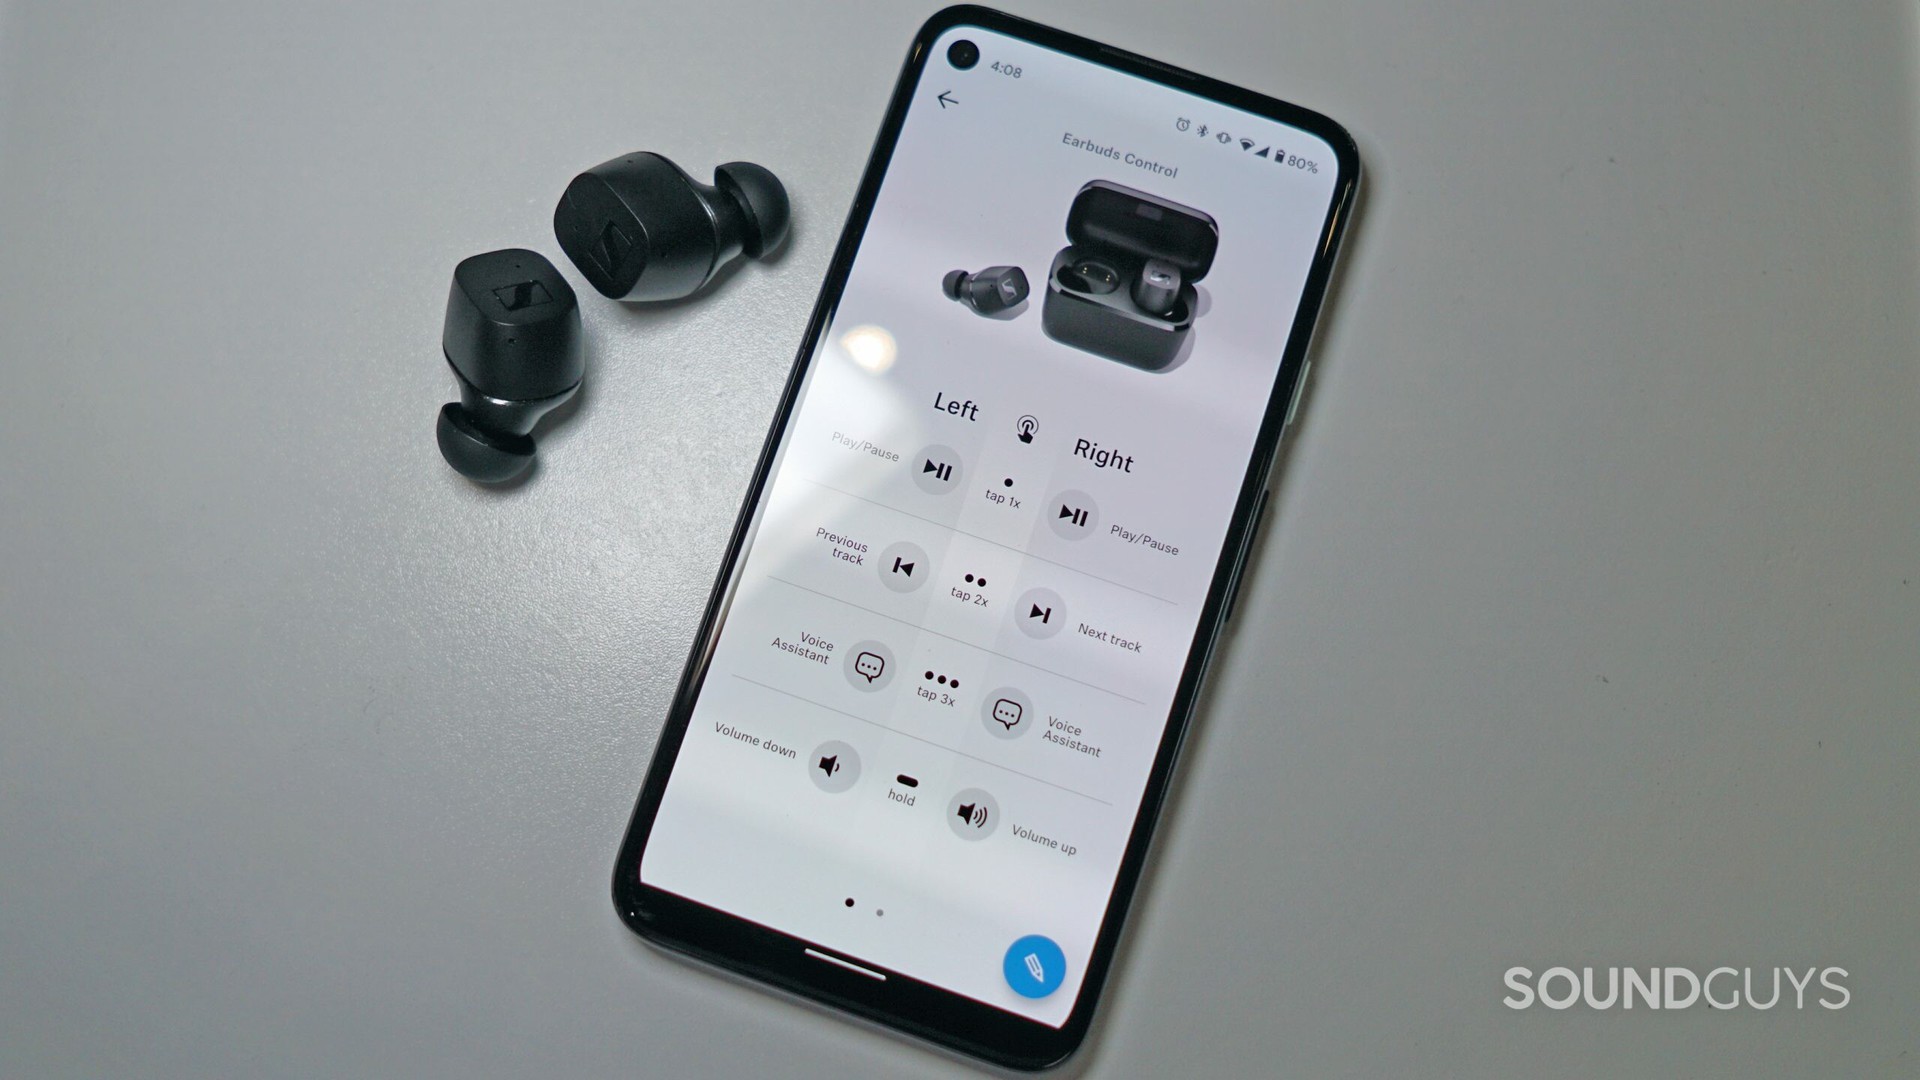 Sennheiser CX True Wireless earbuds next to a phone, with the Sennheiser Smart Control app open on a phone.